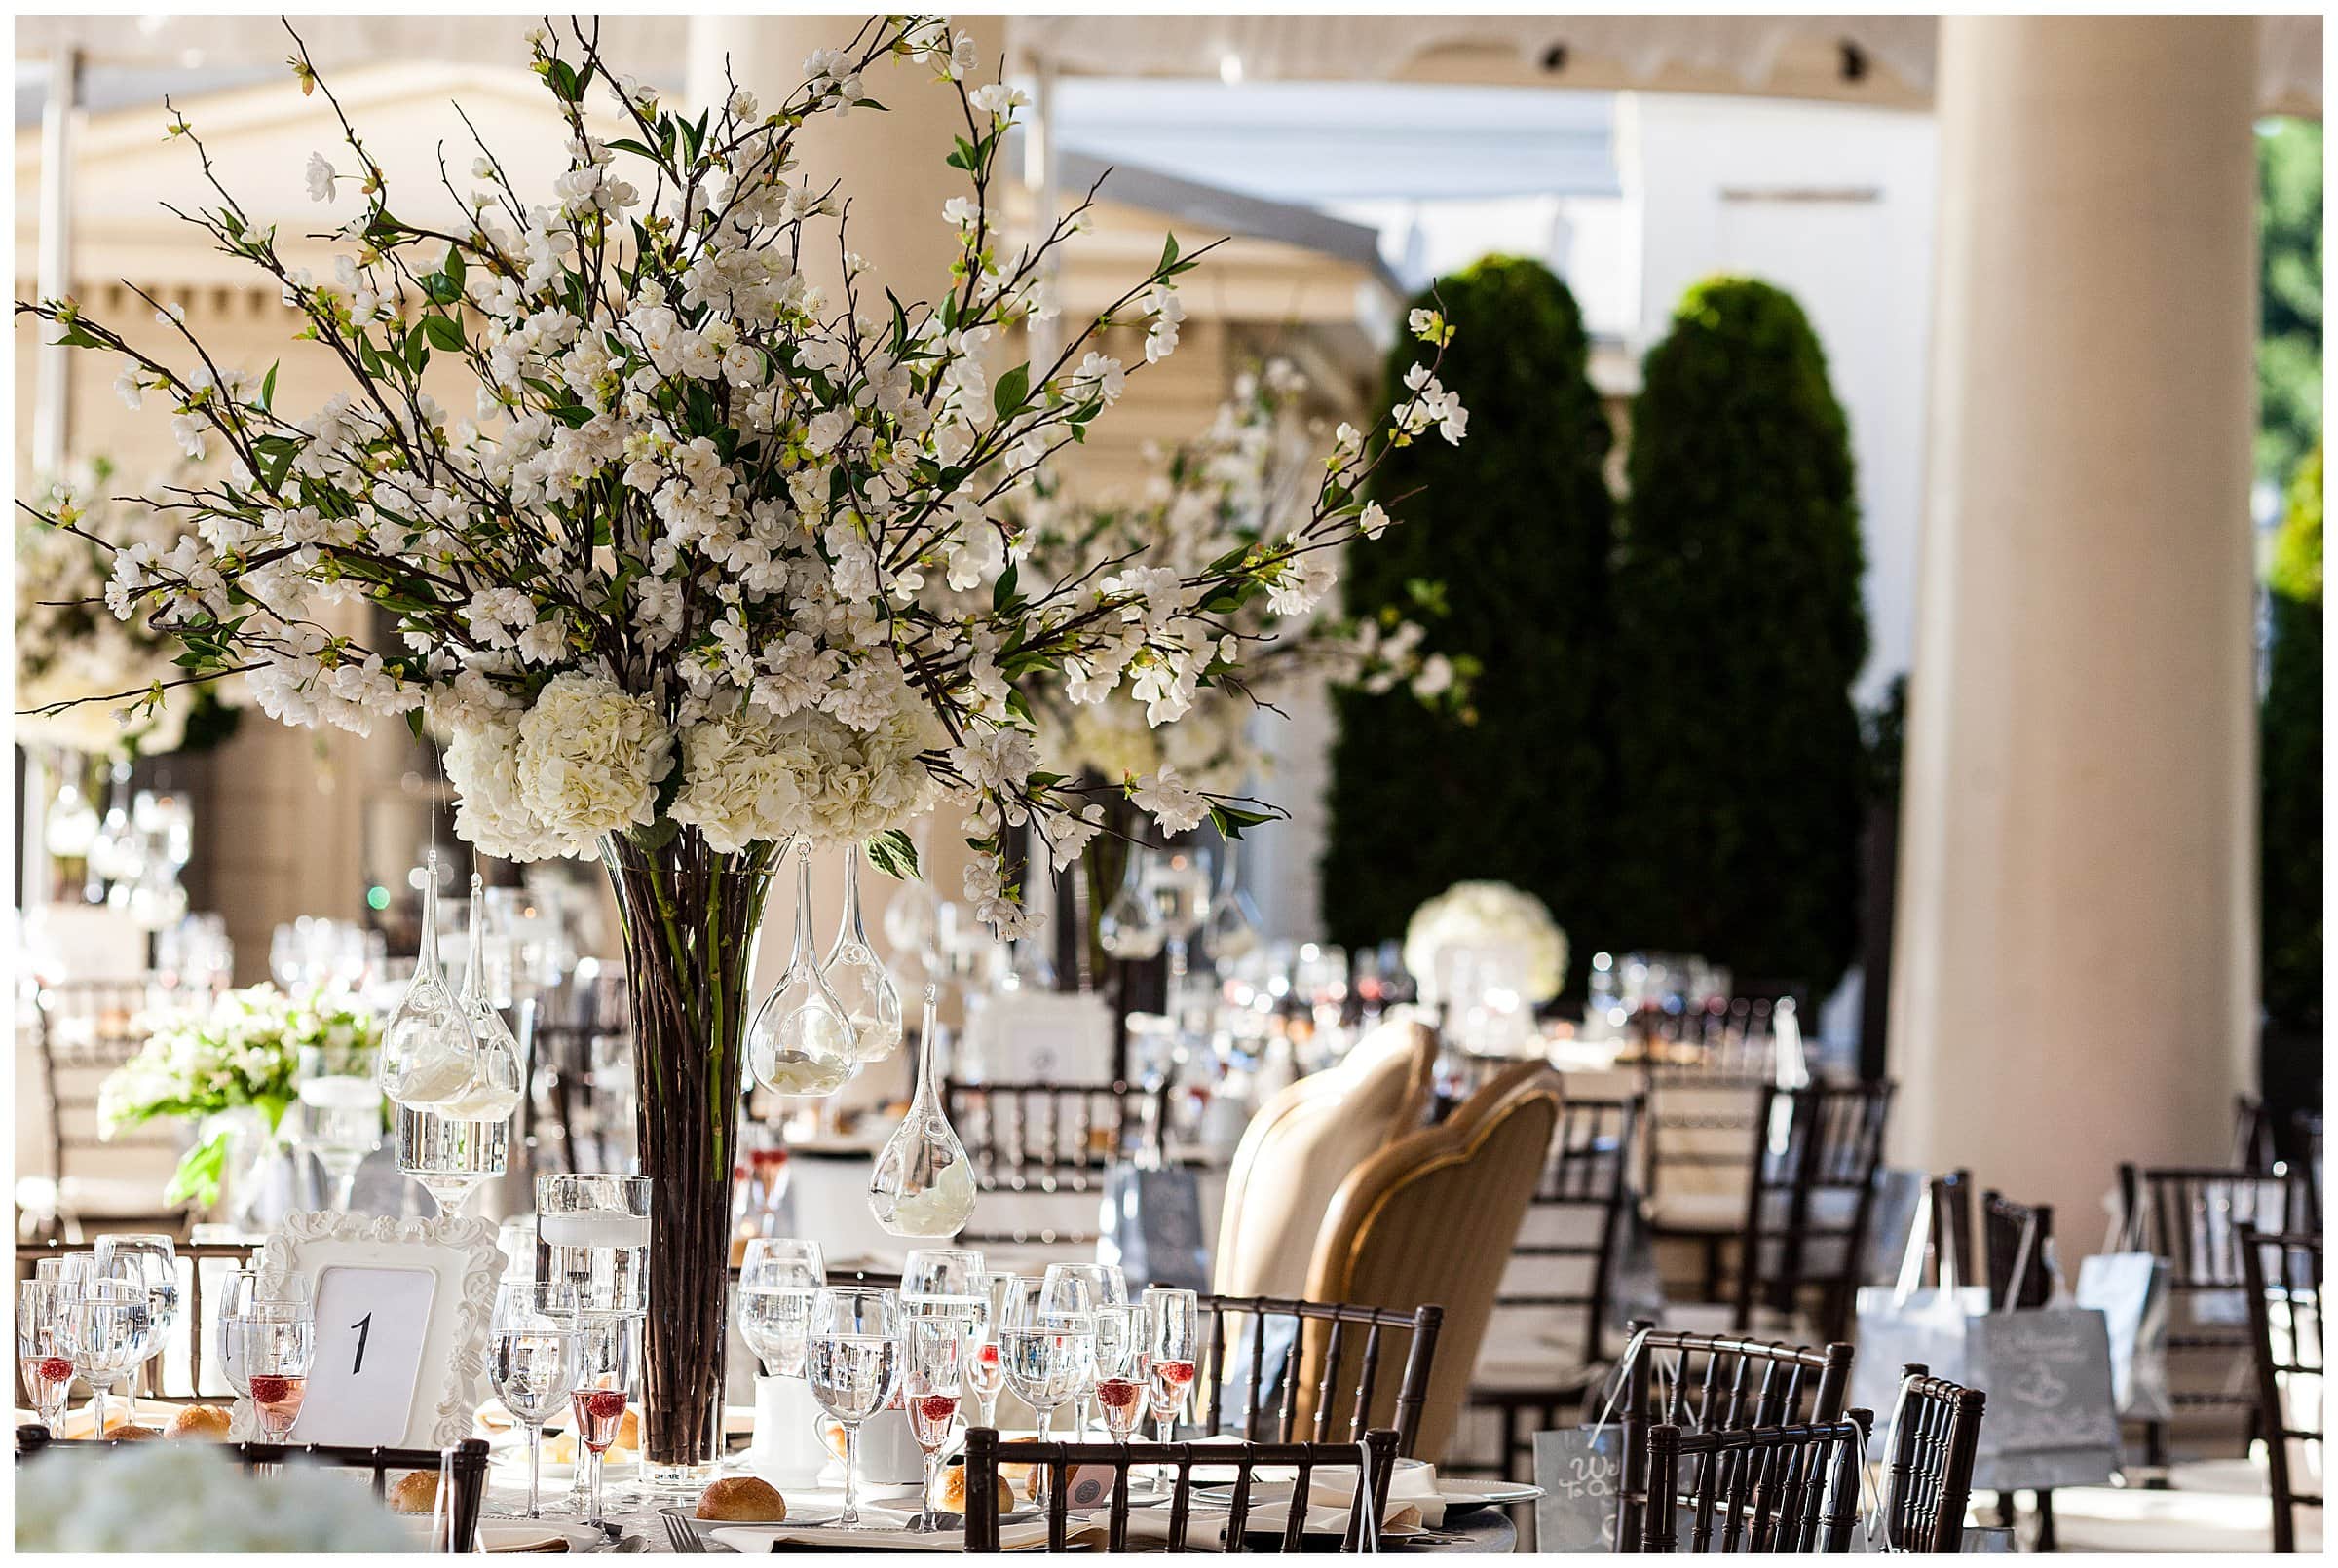 Tall white floral centerpiece with hanging candles at Waterworks Philadelphia wedding reception